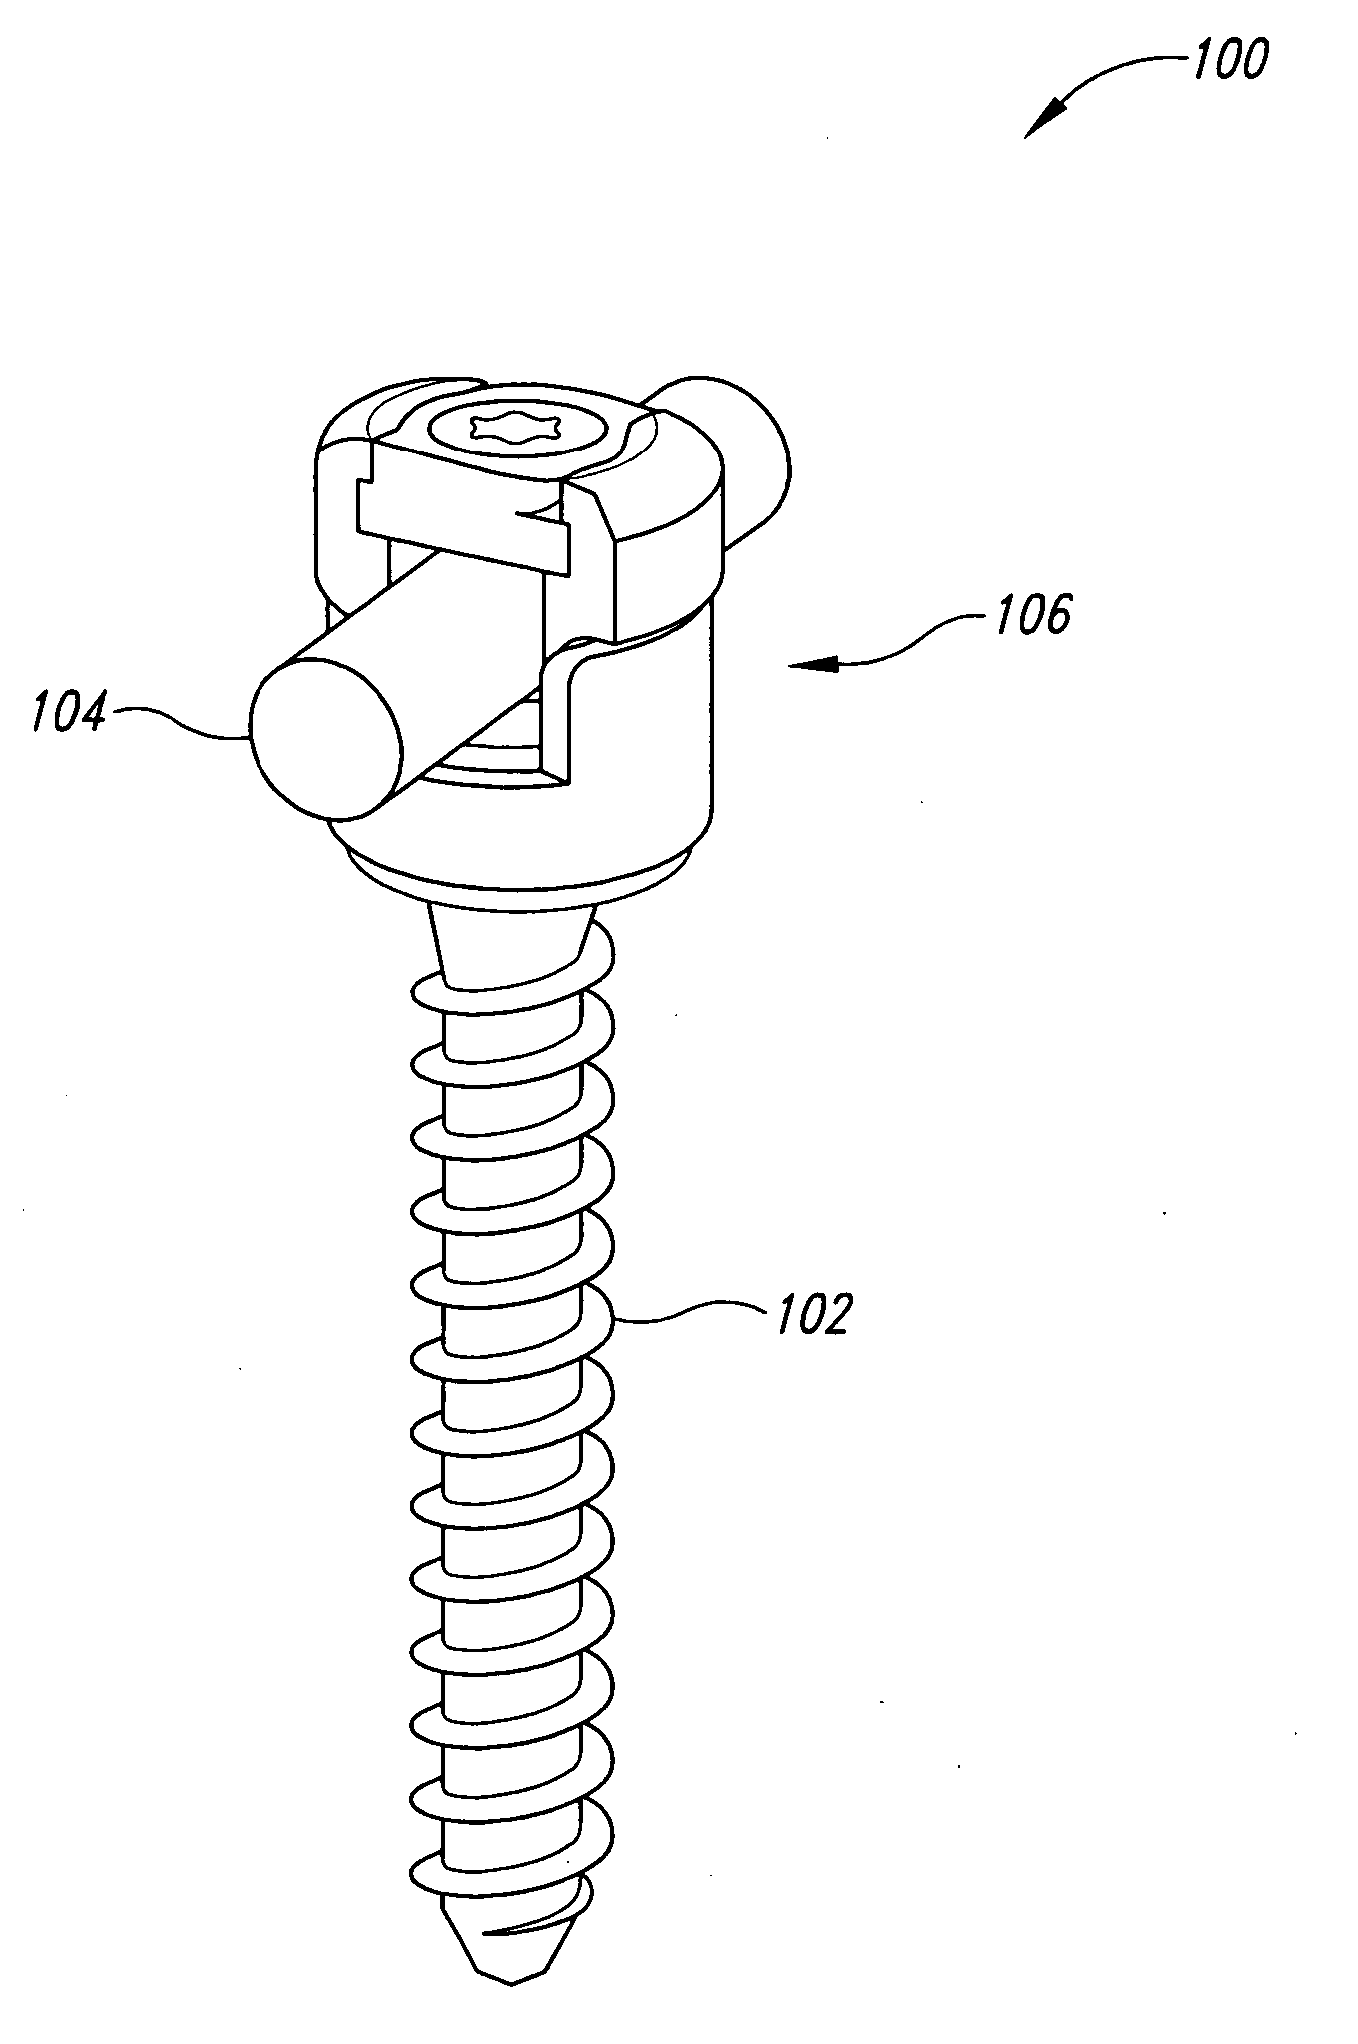 Bone fixation systems and methods of assembling and/or installing the same